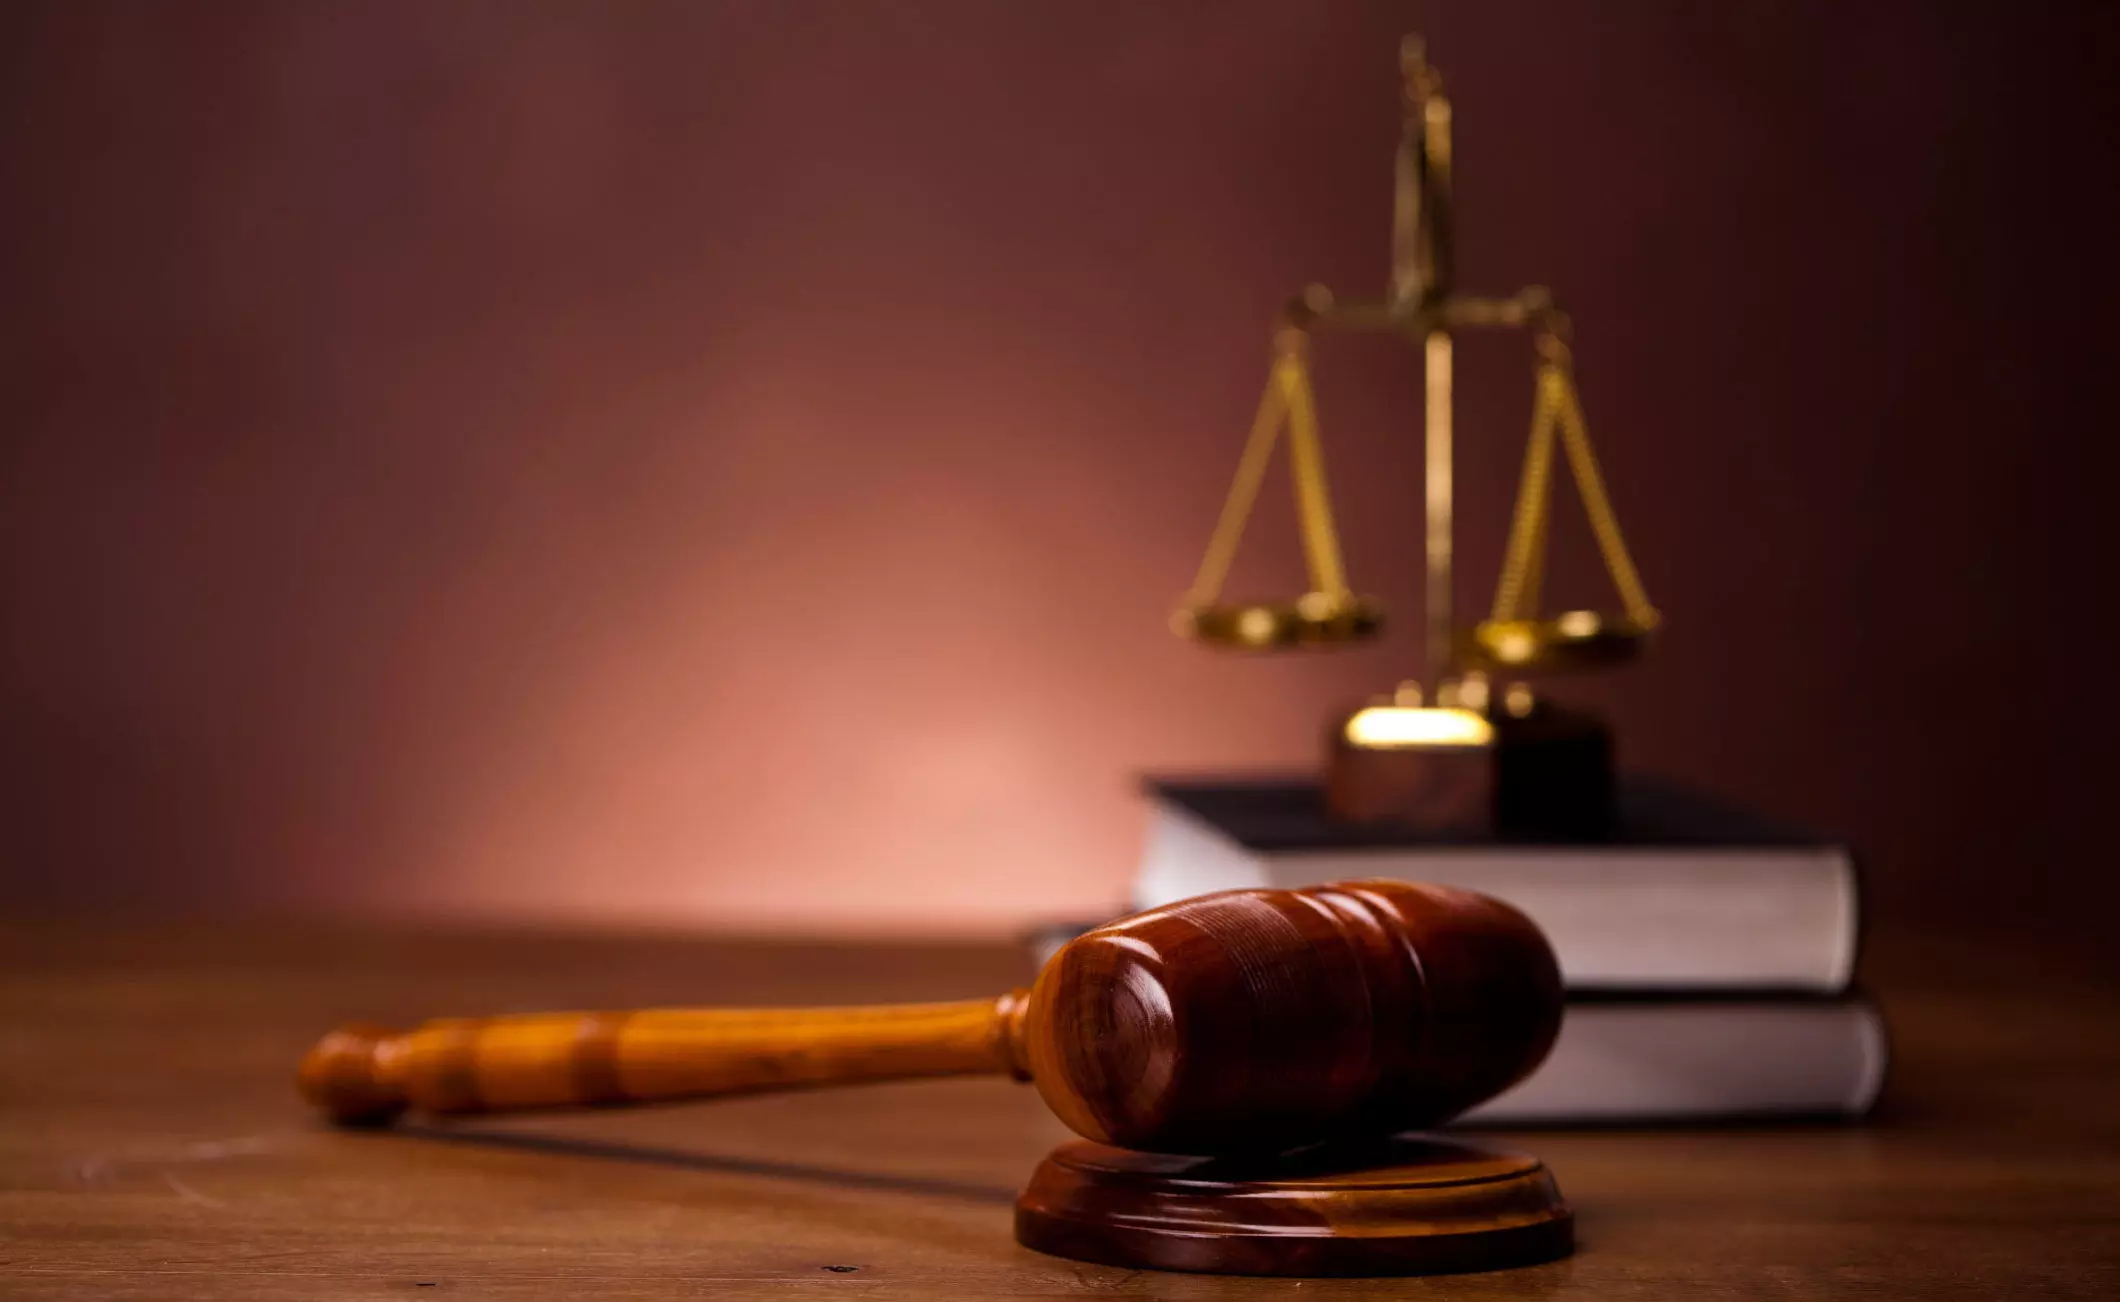 Court remands 2 juveniles for allegedly defiling a 10-year-old girl